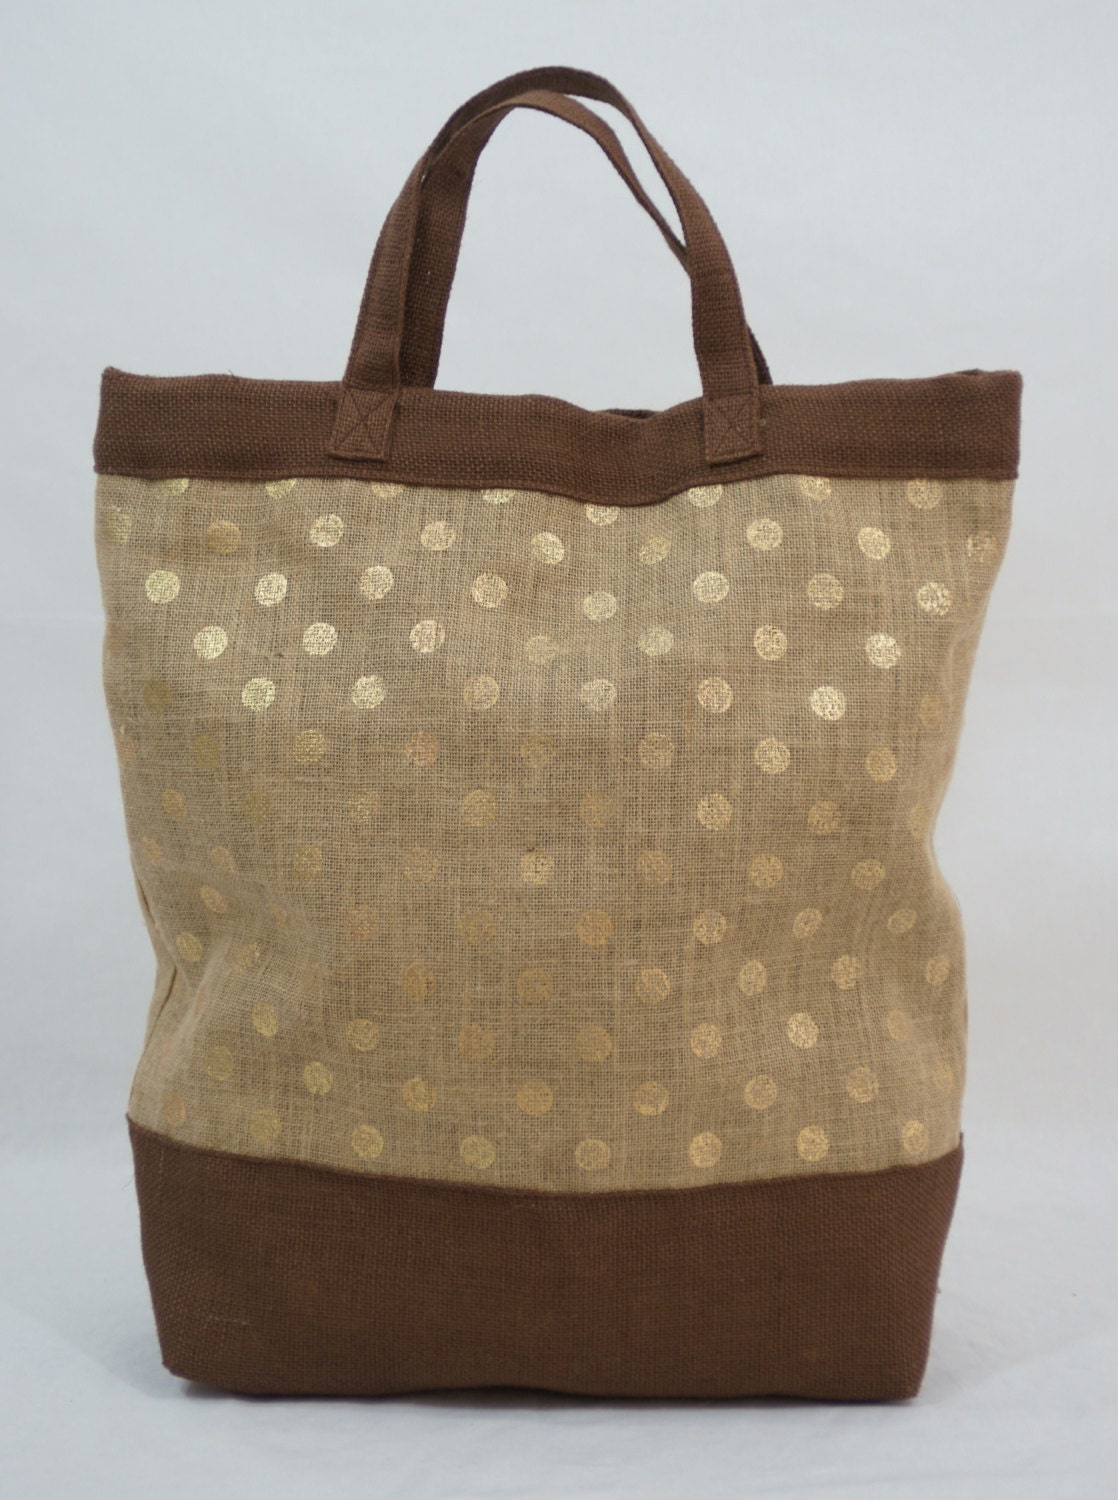 Extra Large/Over Sized Natural Jute Tote with Gold Polka Dot Print and Brown Jute Bottom